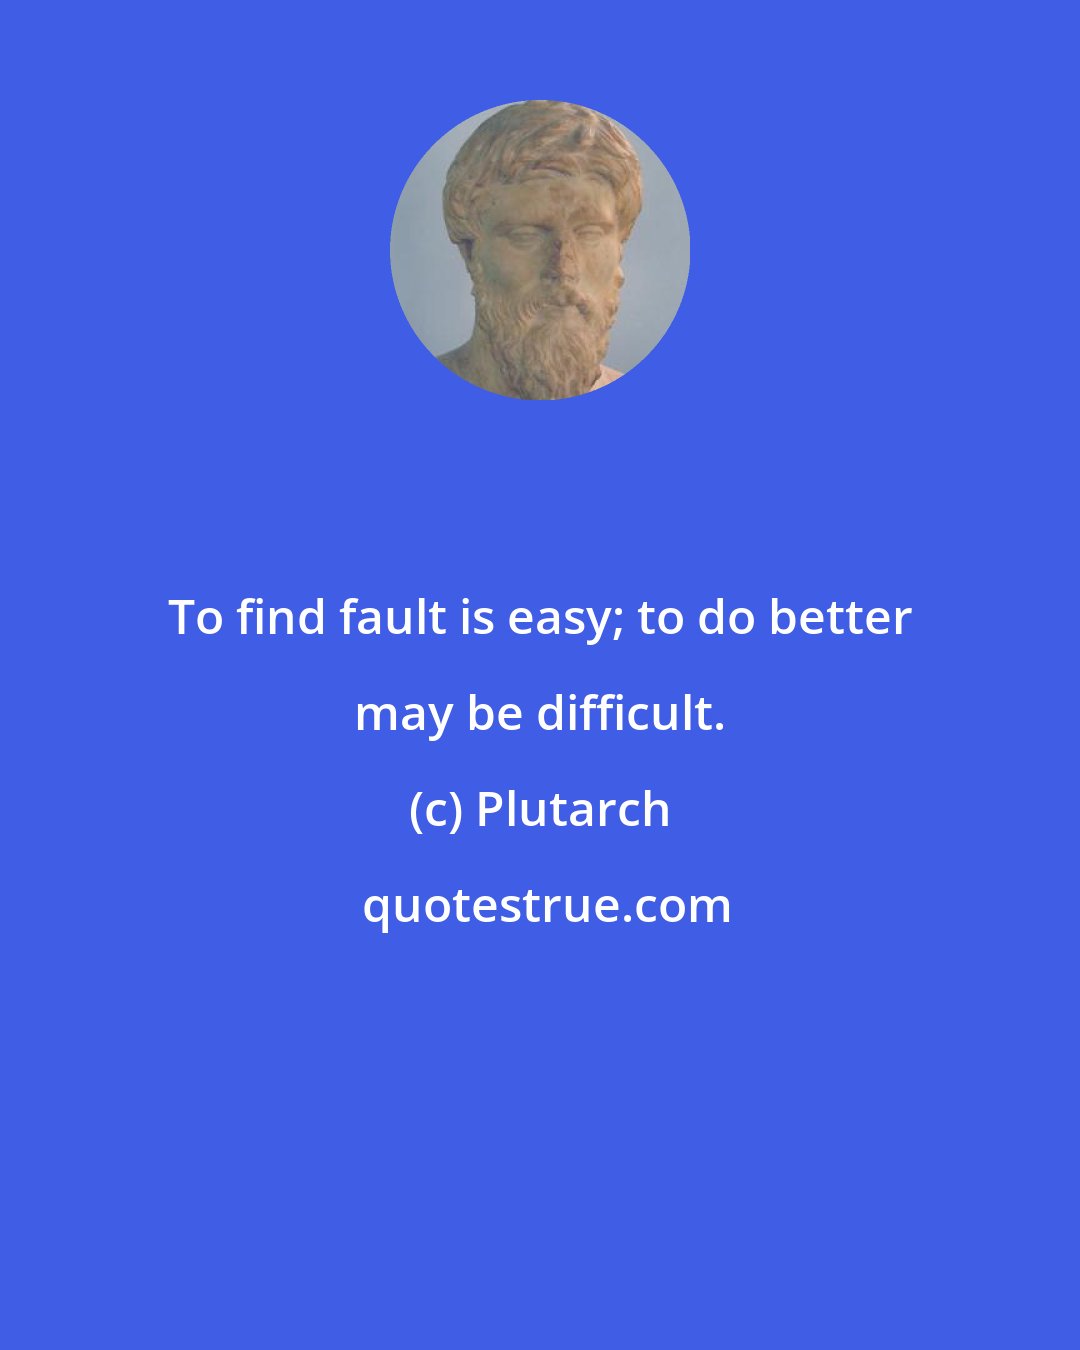 Plutarch: To find fault is easy; to do better may be difficult.